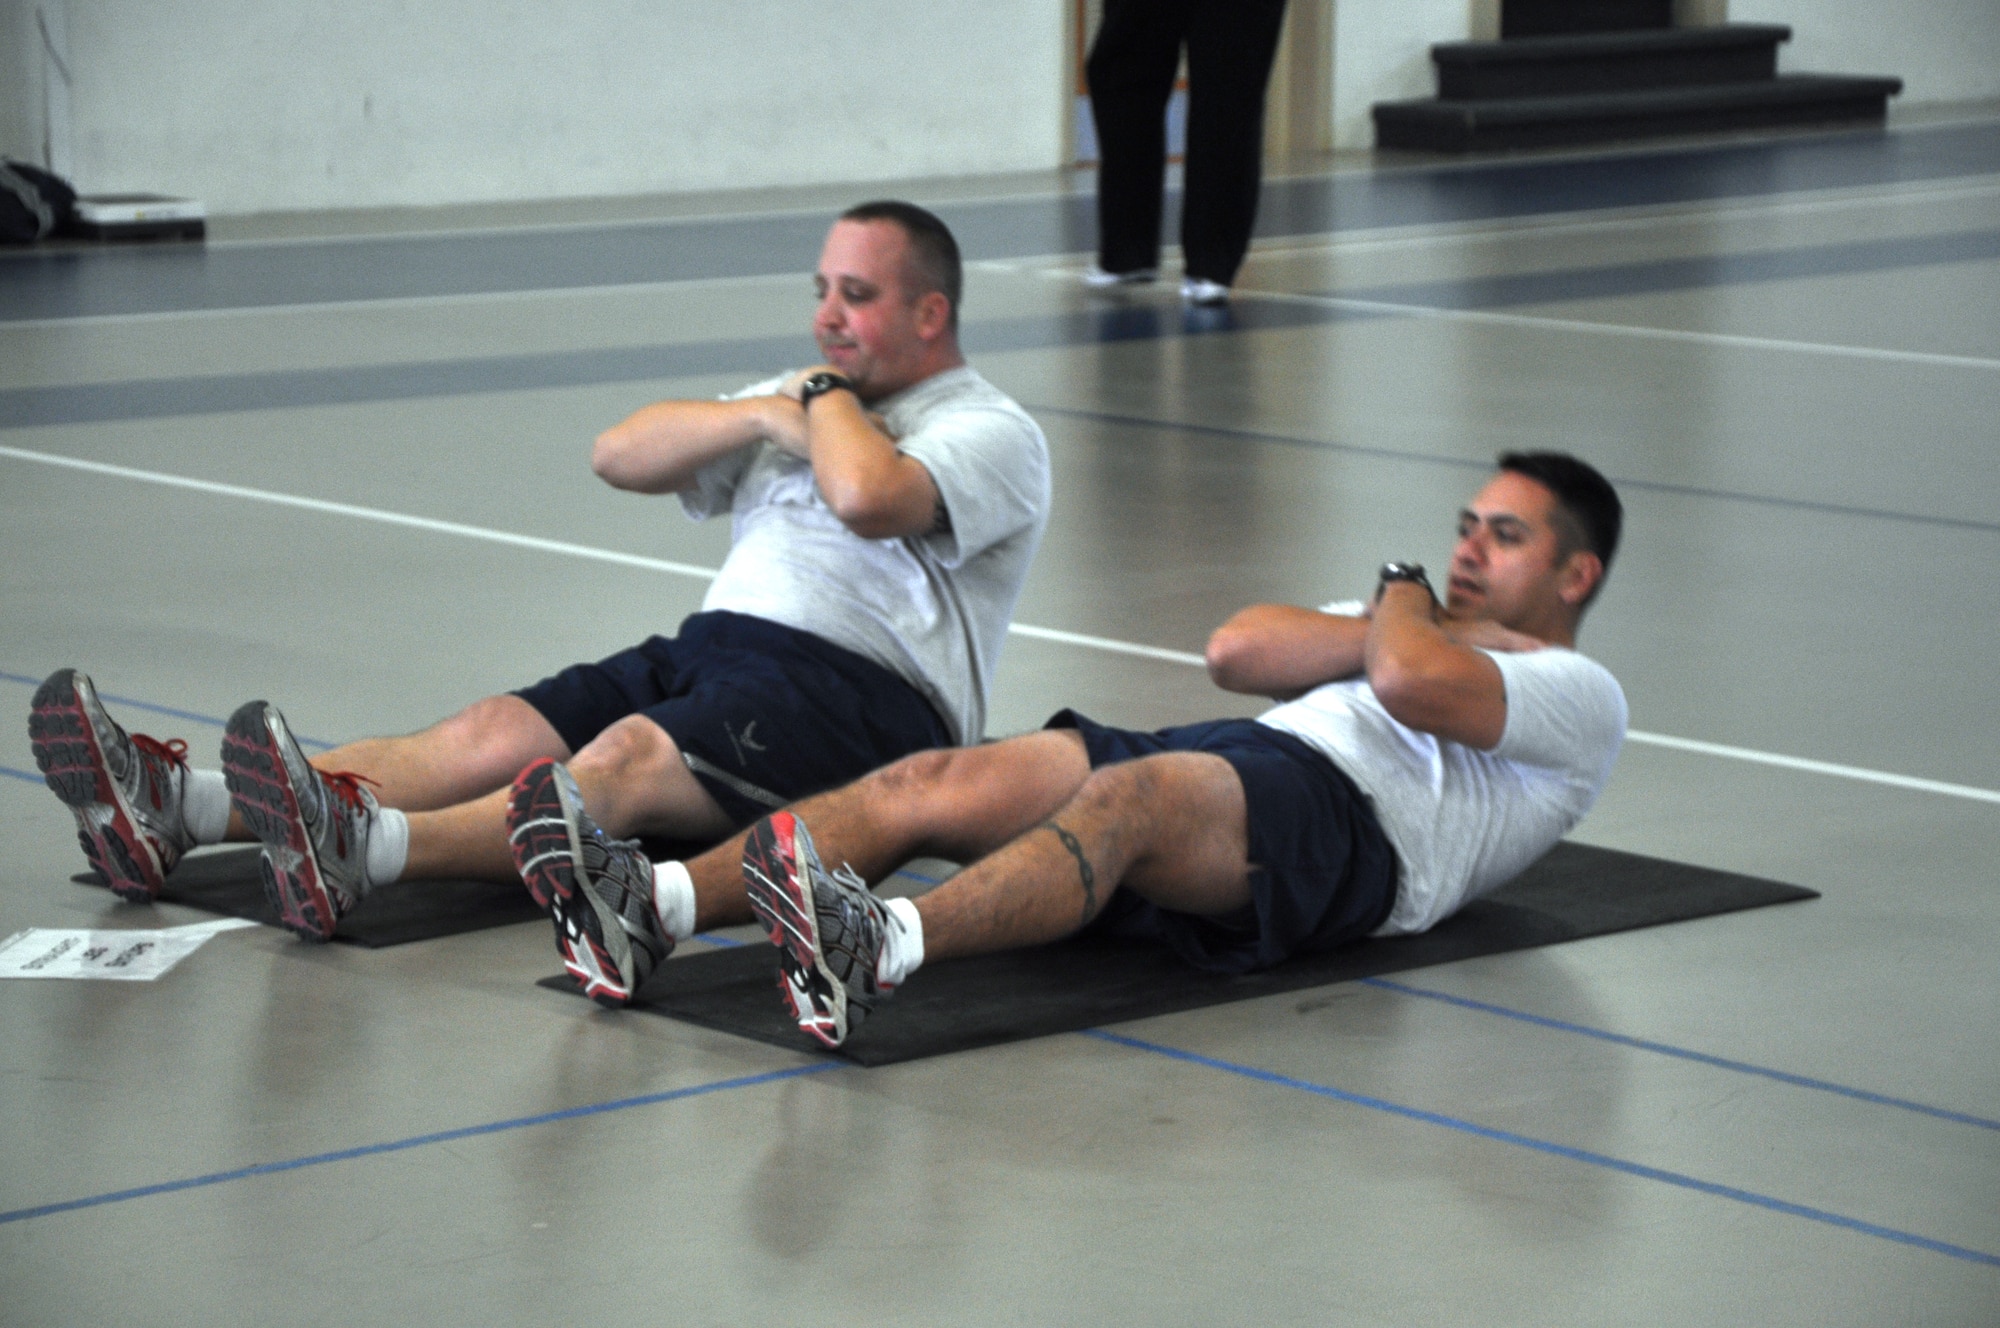 GOODFELLOW AIR FORCE BASE, Texas – Staff Sgt. Robert Prince, 17th Training Support Squadron unit training manager, and Master Sgt. Gregorio Escamilla, 17th Training Support Squadron flight chief, participate in one of the circuit training stations at the Carswell Field House here, Jan. 14. This station and others were incorporated into the circuit training to focus on the abdominal sections. (U.S Air Force photo/ Airman 1st Class Joshua Edwards)